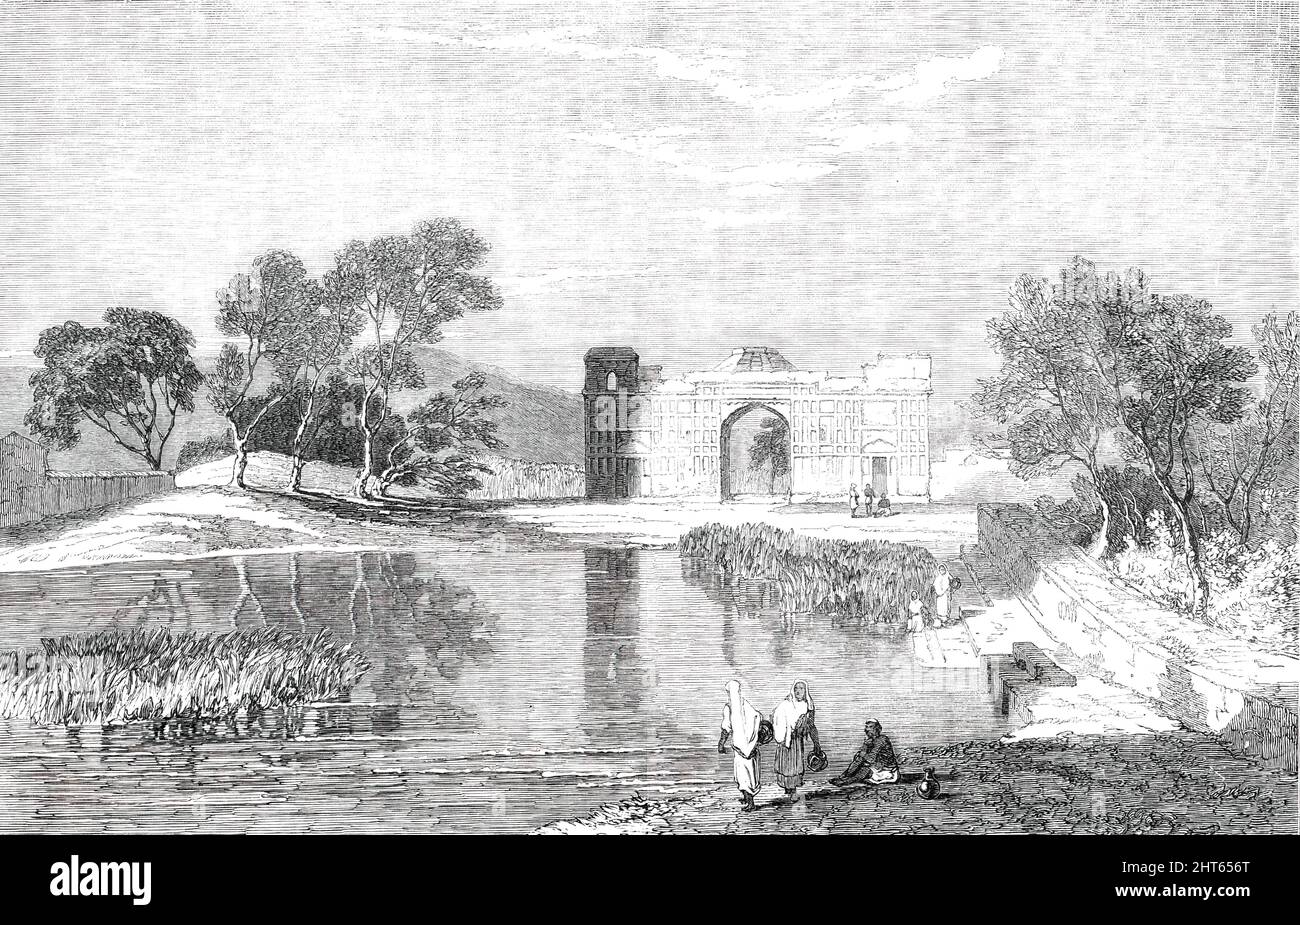 Husyn-Abdal, in the Punjab, [India] - from a sketch by G. T. Vigne, Esq., 1850. 'The charming scene...lies near the east bank of the Indus, and is so called from containing the tomb of a Mahometan saint of that name...It is situate in a delightful valley, watered by springs which gush from amongst the rocks...the glorious Akbar expressed the feelings excited in his mind on viewing the spot by exclaiming &quot;Wah!&quot; the usual interjection of admiration; hence the ruined garden is so named...Husyn-Abdal is on the high-road from Lahore to Attock. It is thus mentioned by Mr. Moore, in his exq Stock Photo